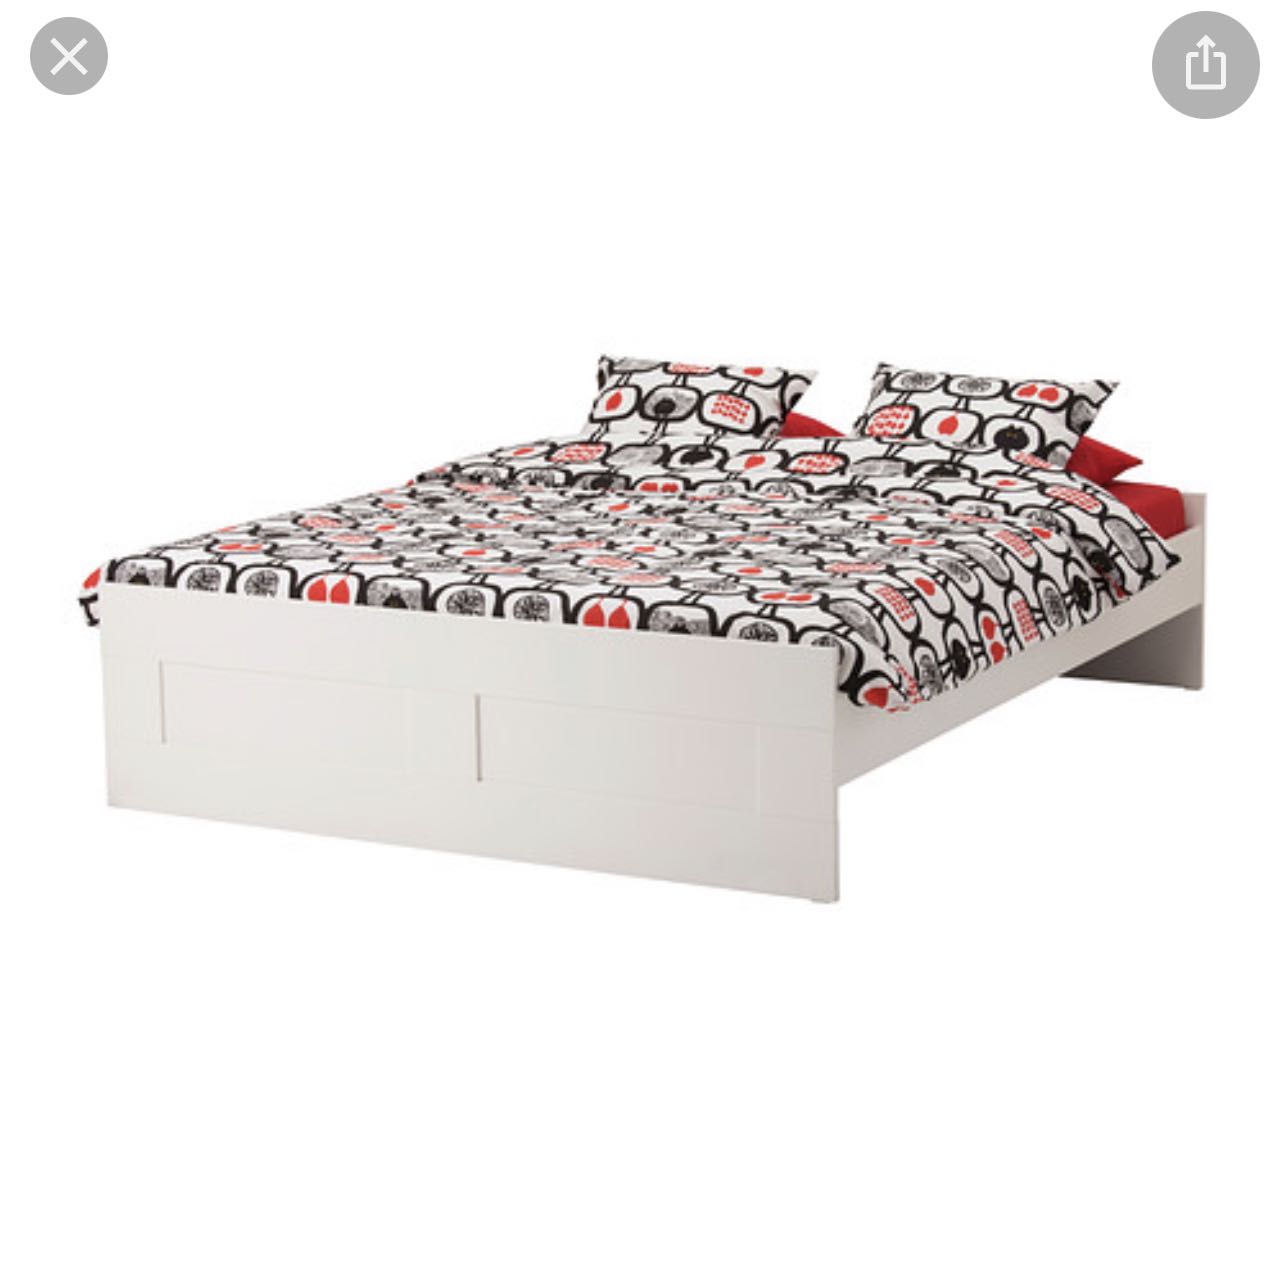 Ikea Brimnes Bed Frame Without Storage, Ikea Full Bed Frame With Shelves